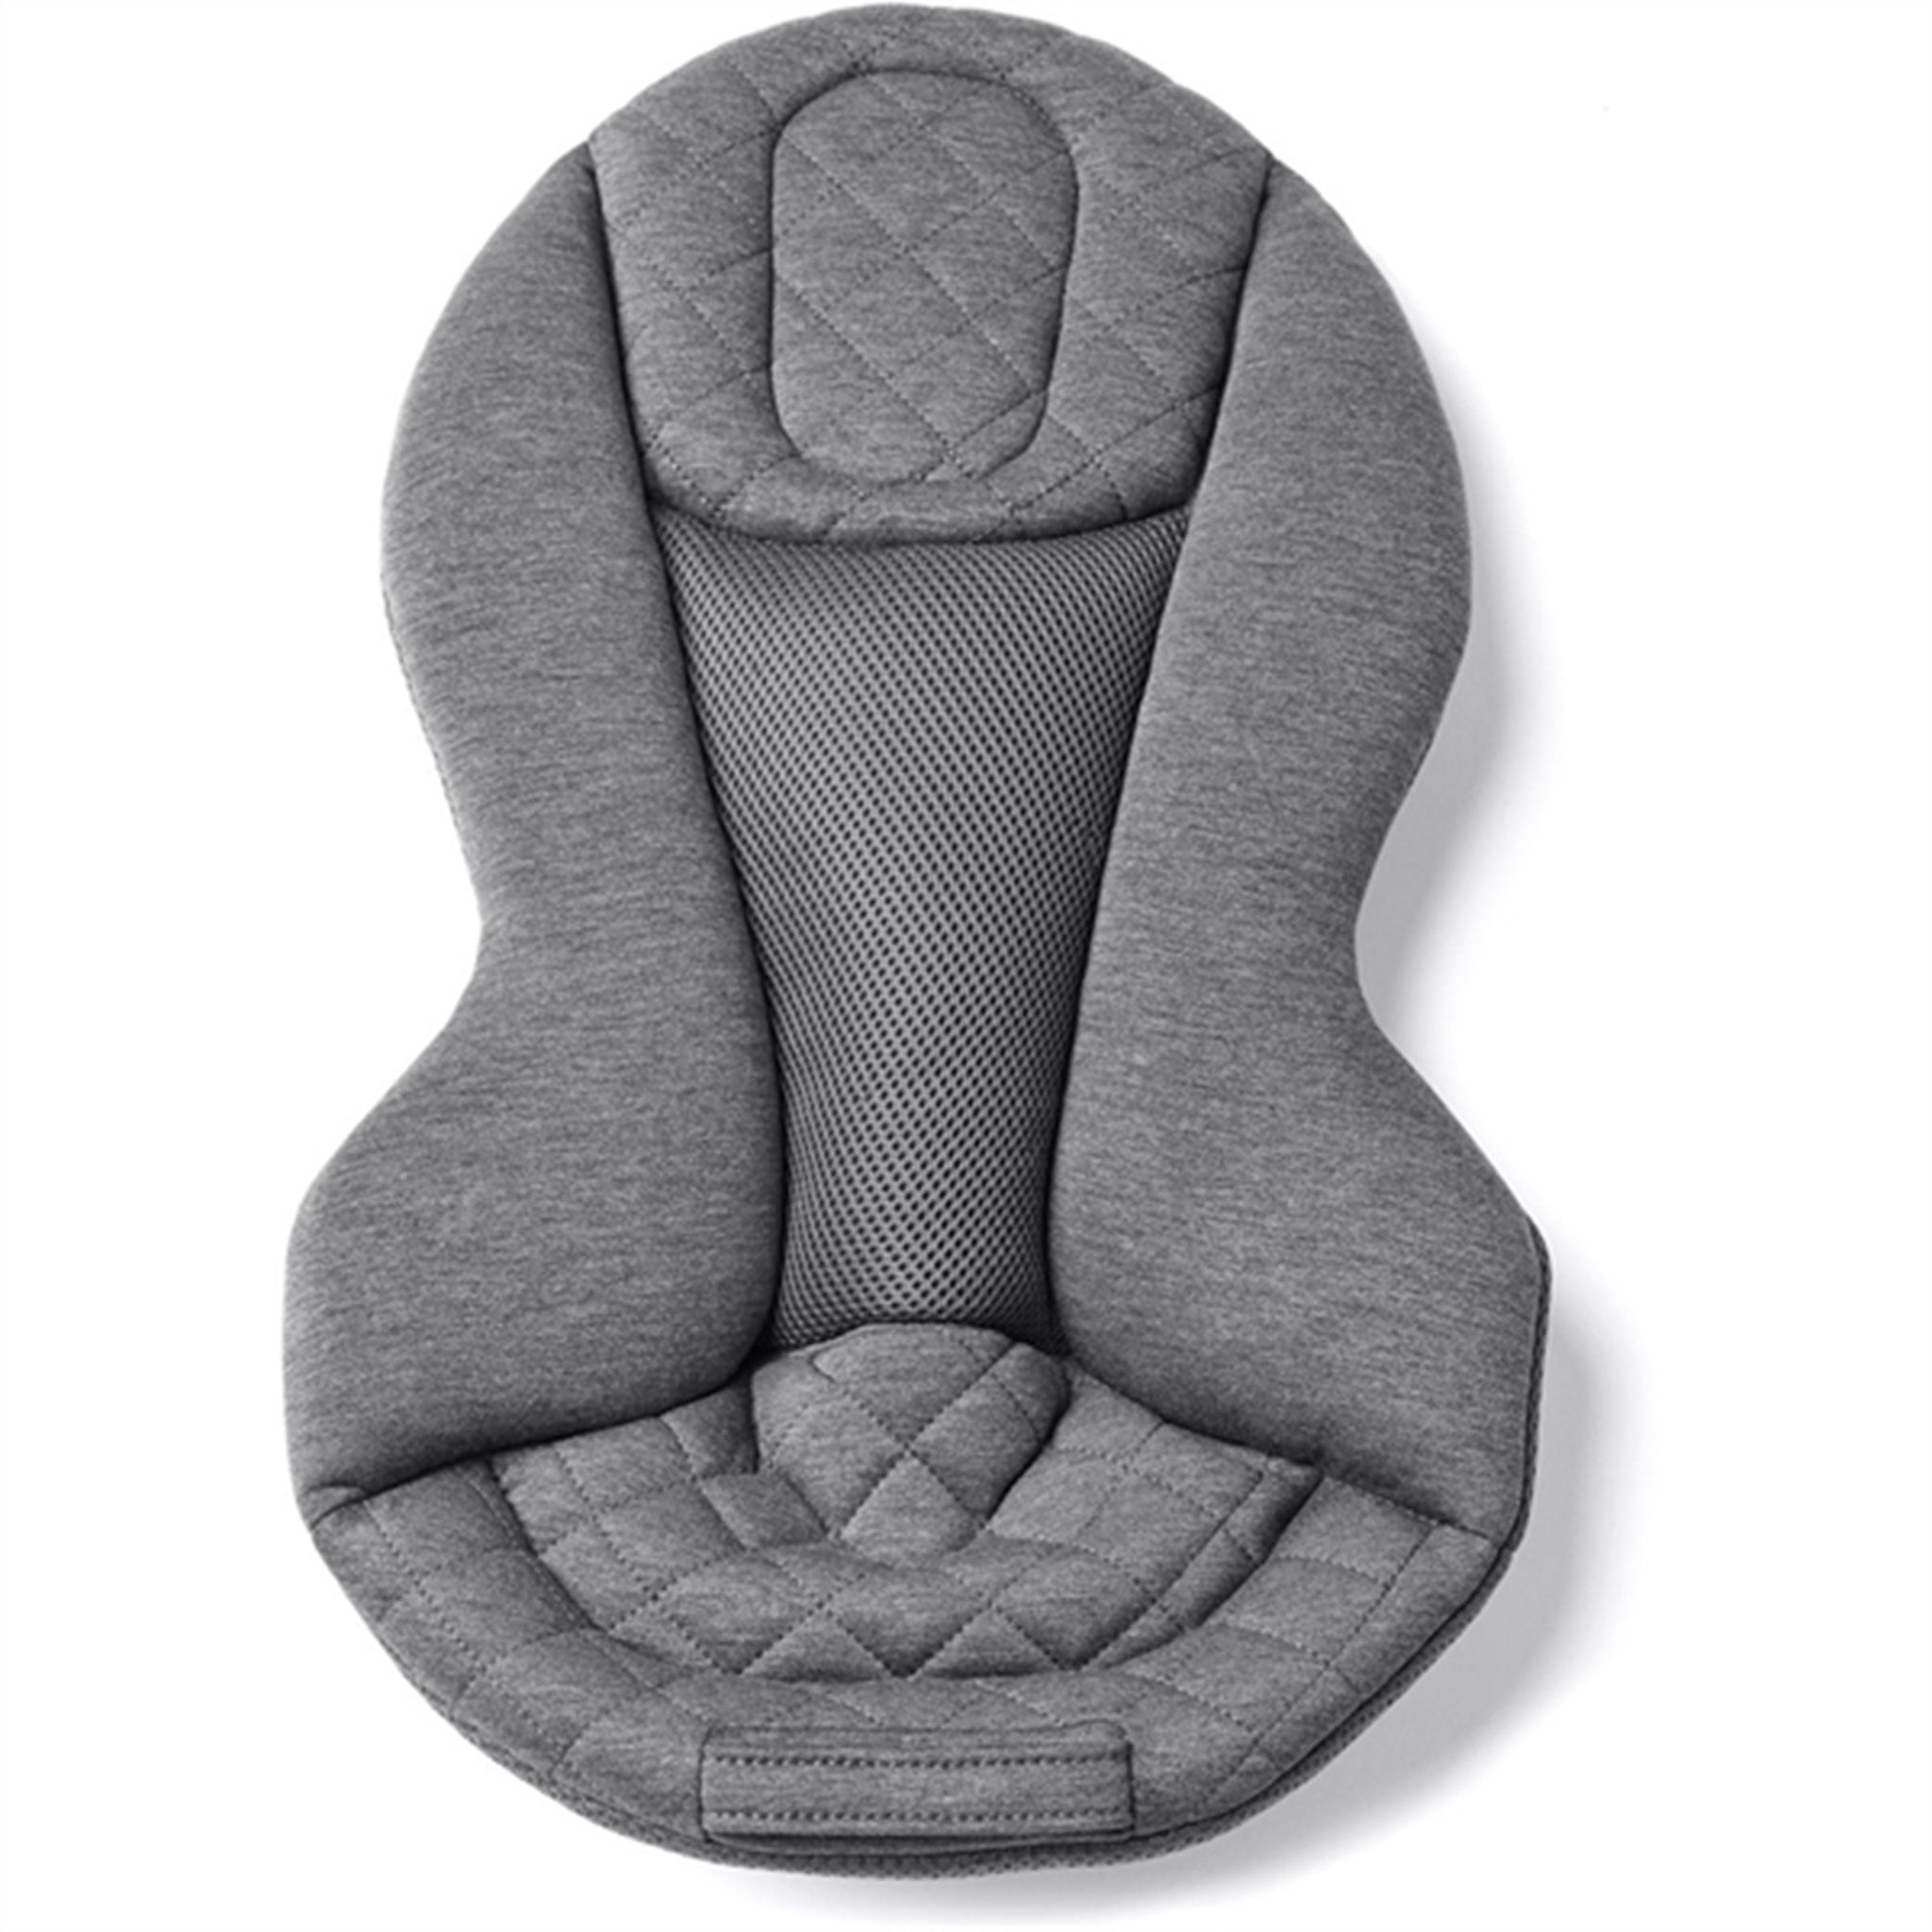 Ergobaby Evolve 3-in-1 Bouncer Charcoal Grey 7